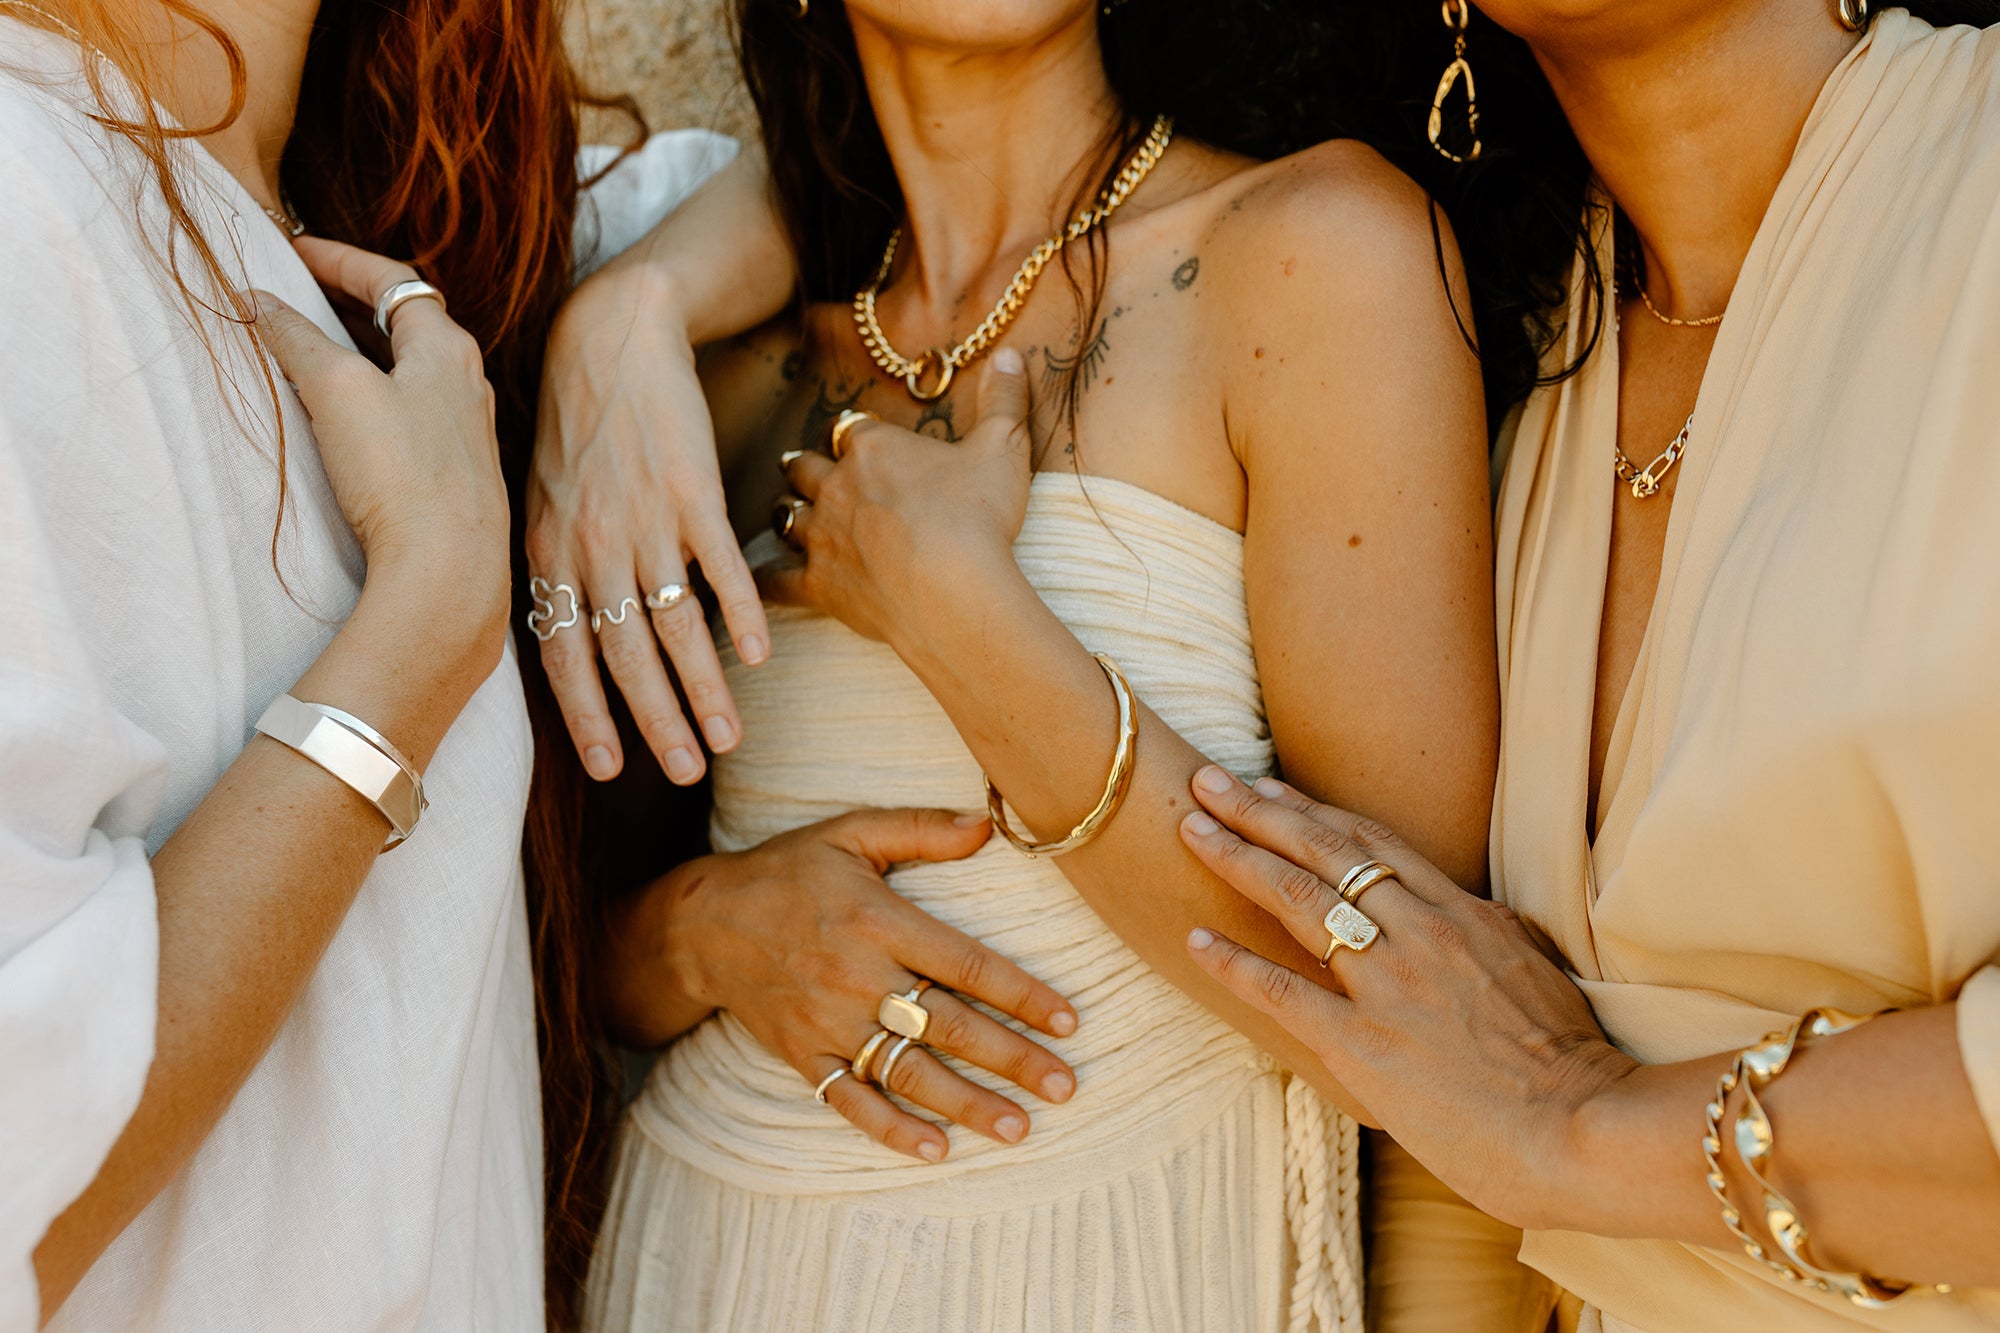 Rings - ethical gold and silver | BRUNA The Label